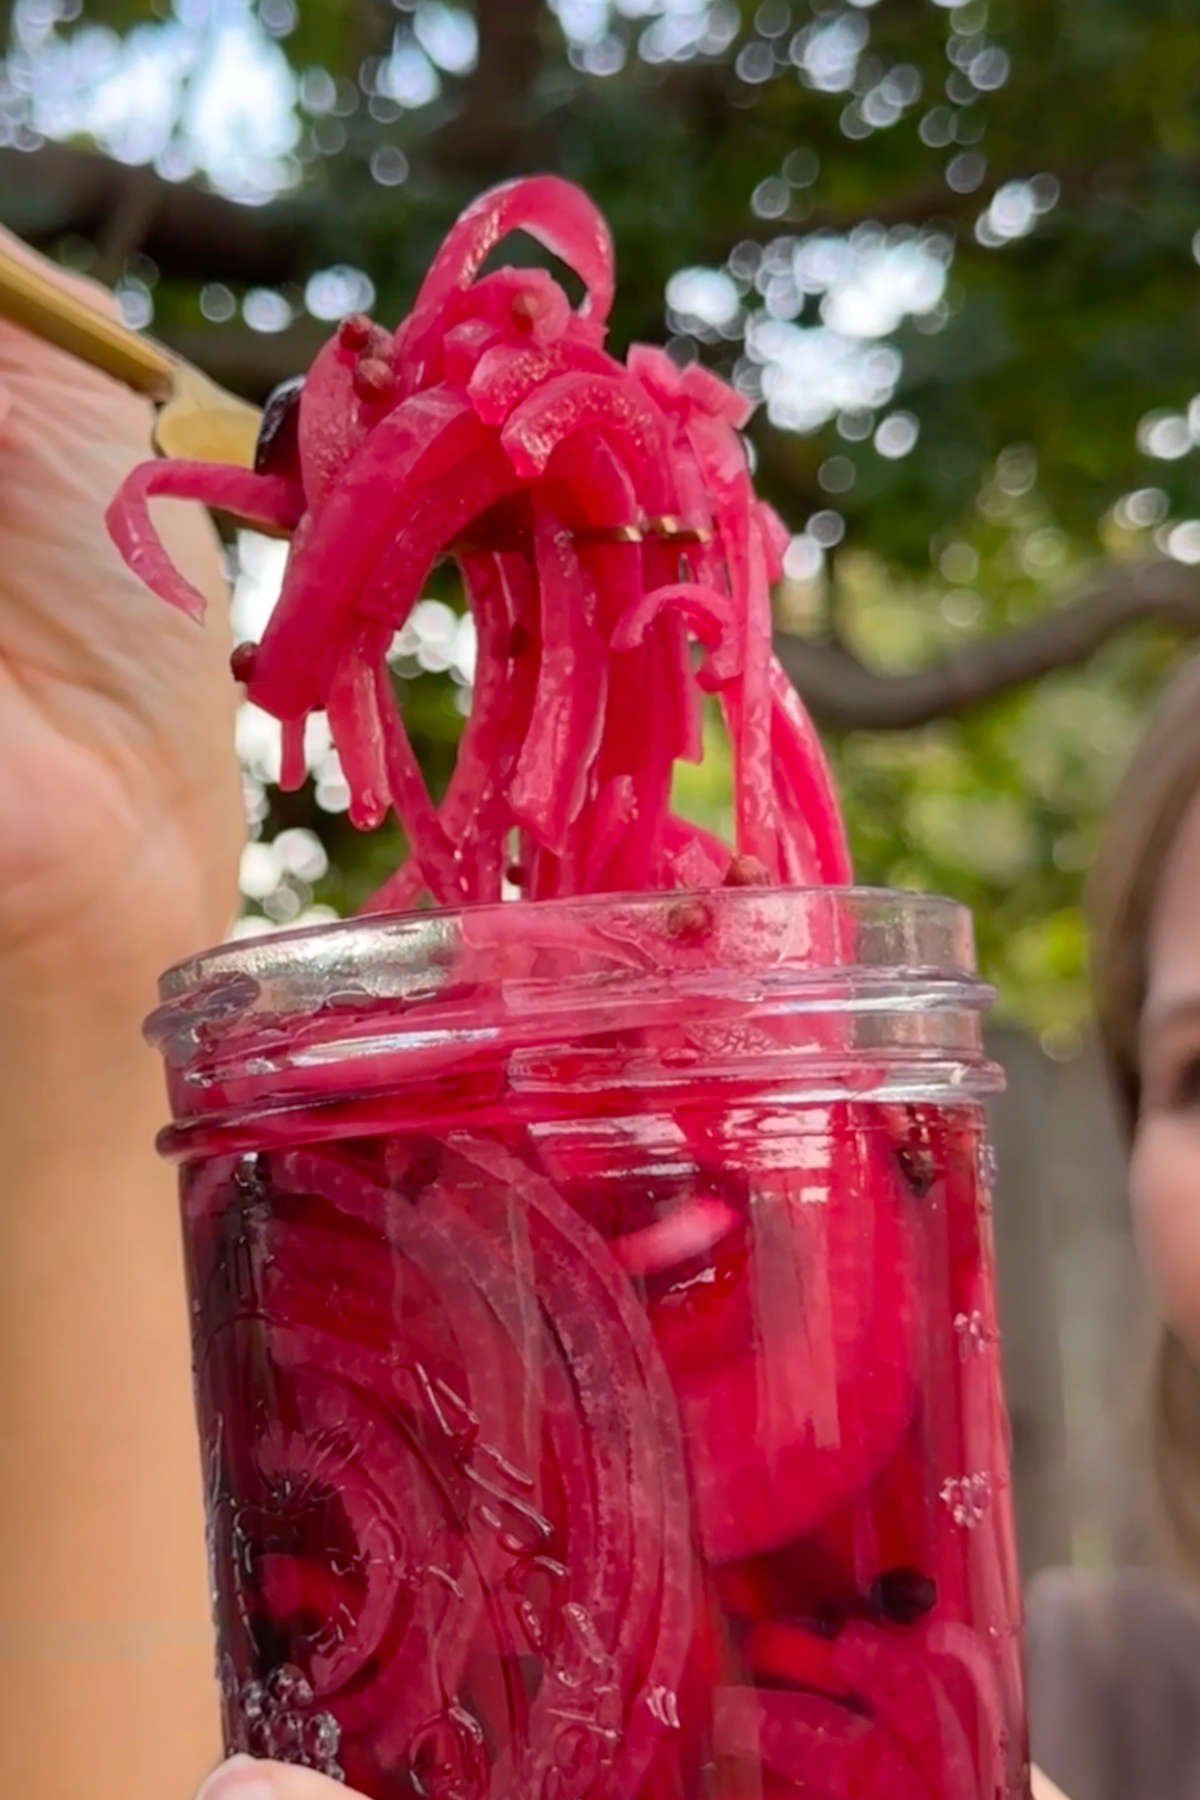 A fork lifting pickled red onions out of a jar.